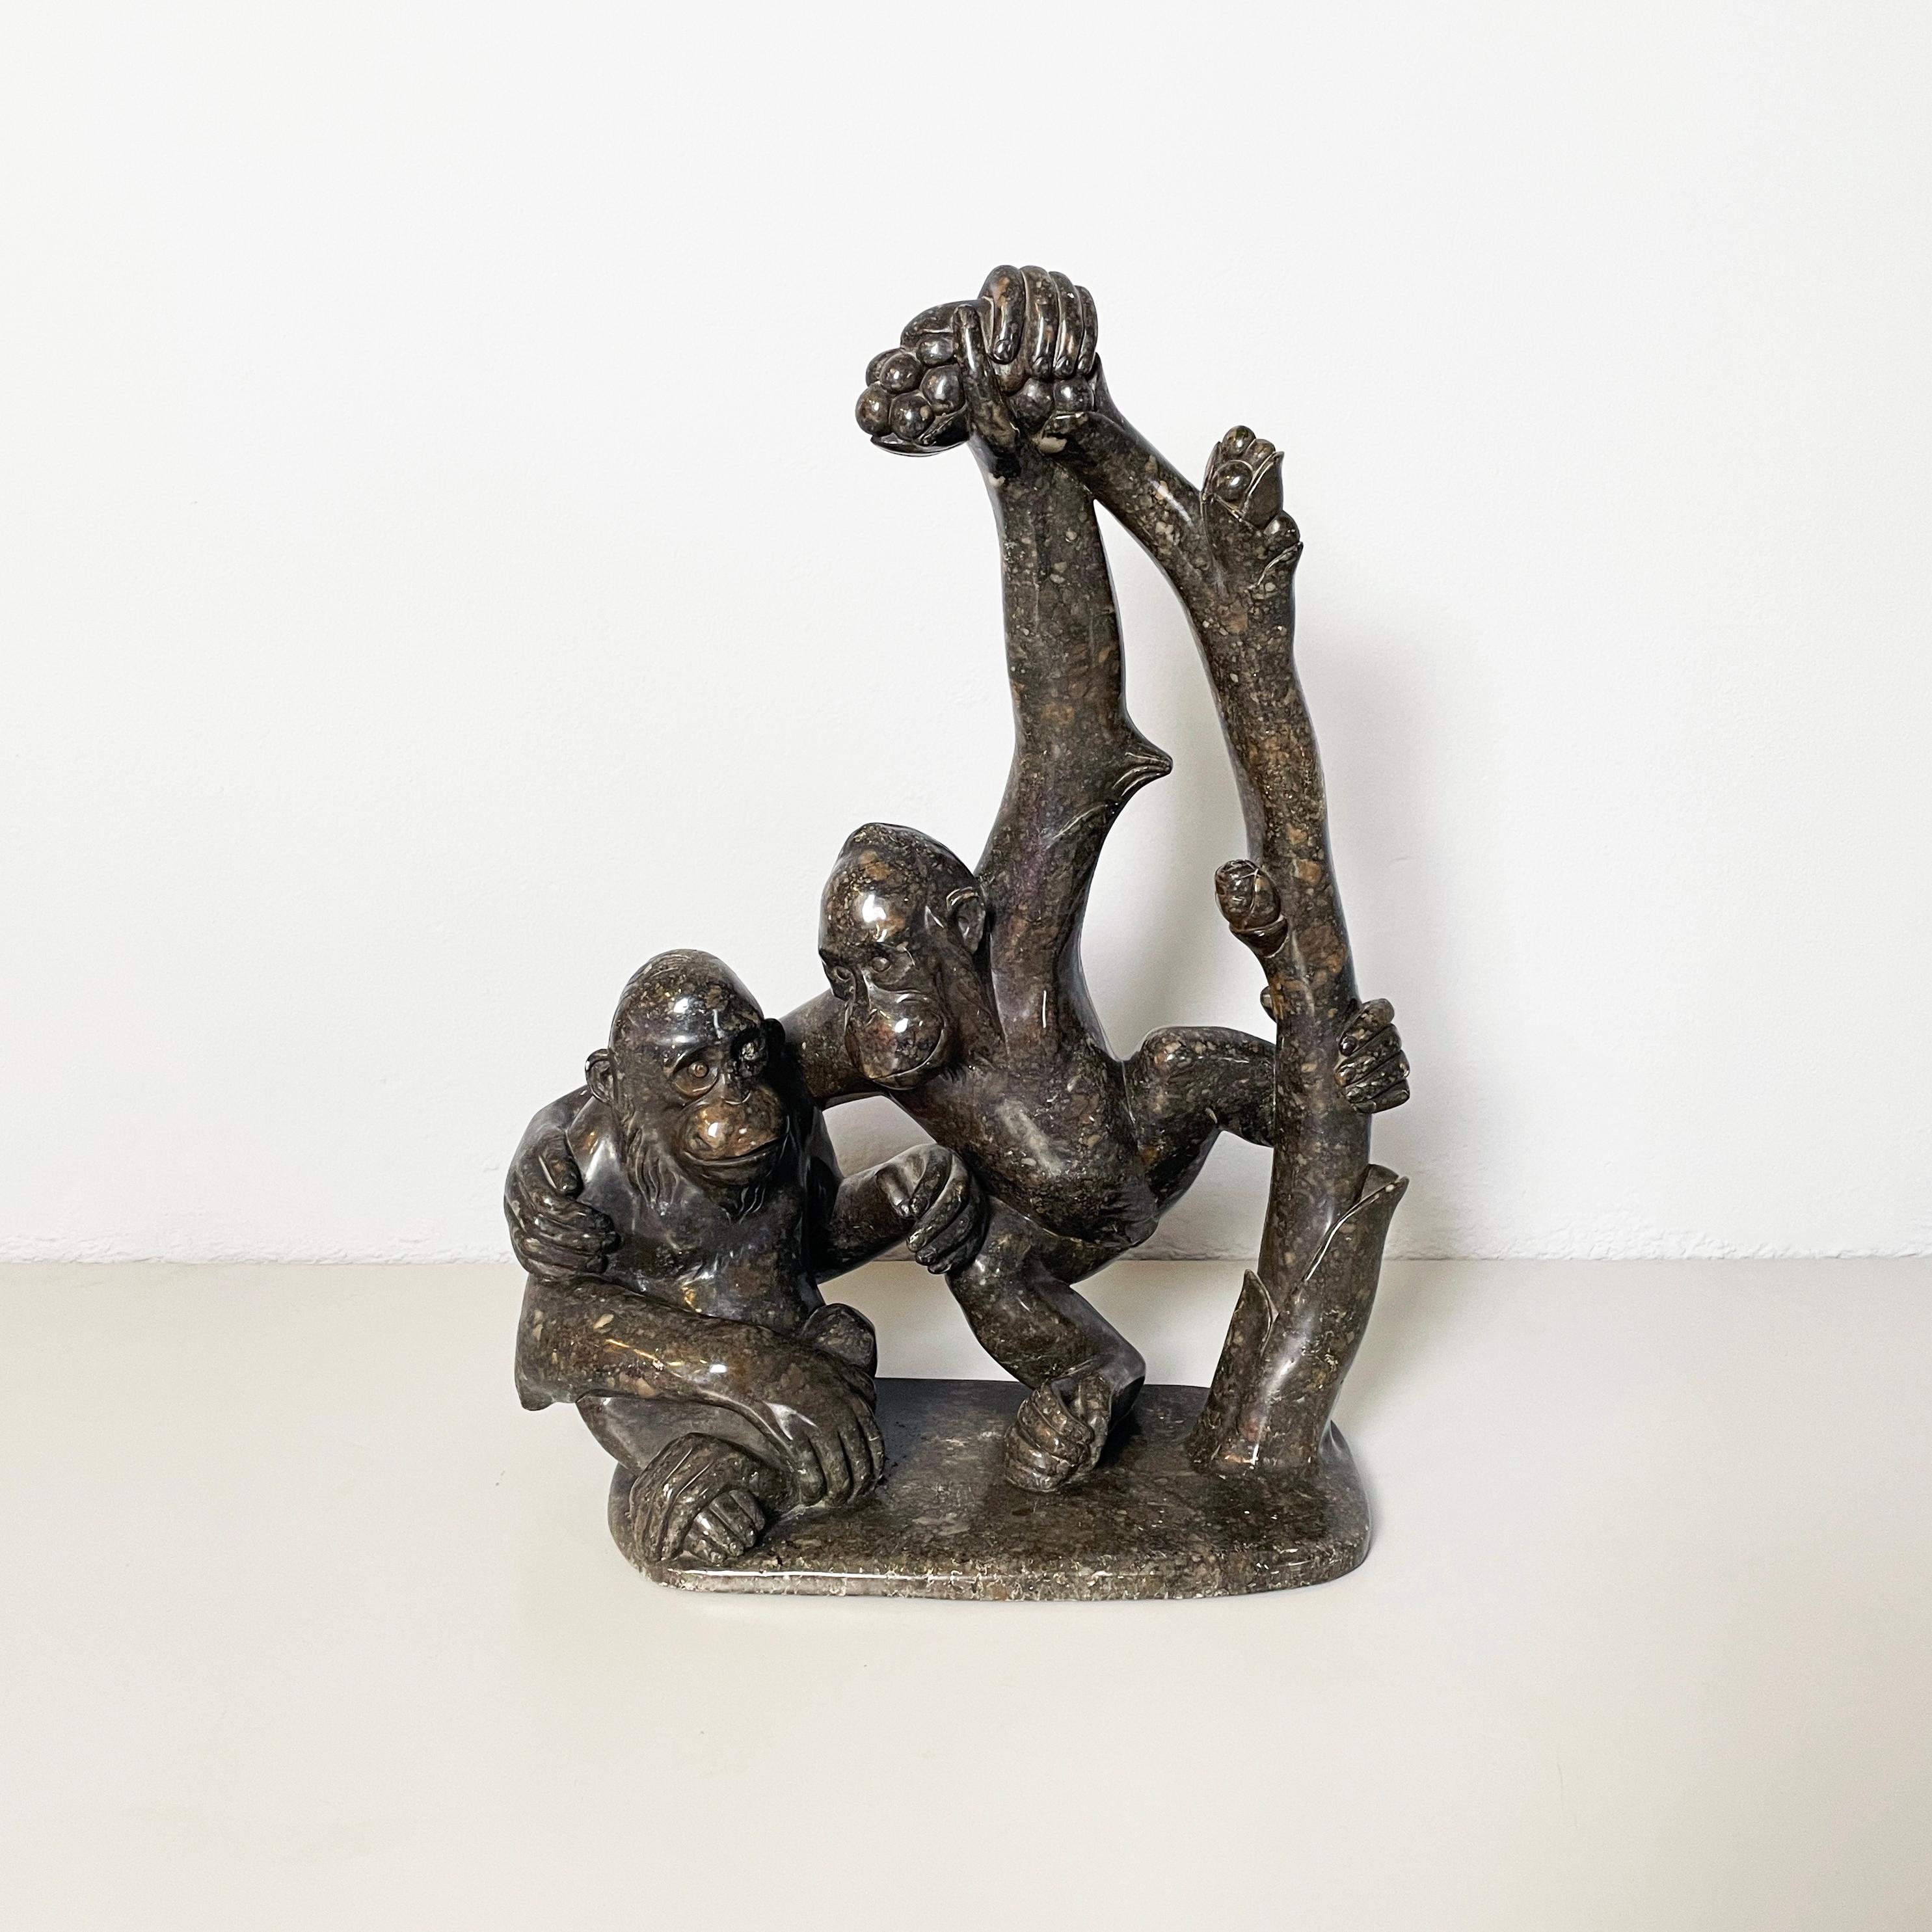 Italian Mid-Century modern Sculpture of monkeys in marble, 20th century
Sculpture depicting two monkeys, entirely in finely worked dark marble. The first monkey is sitting on the ground and the second is weighed down by a branch as it reaches